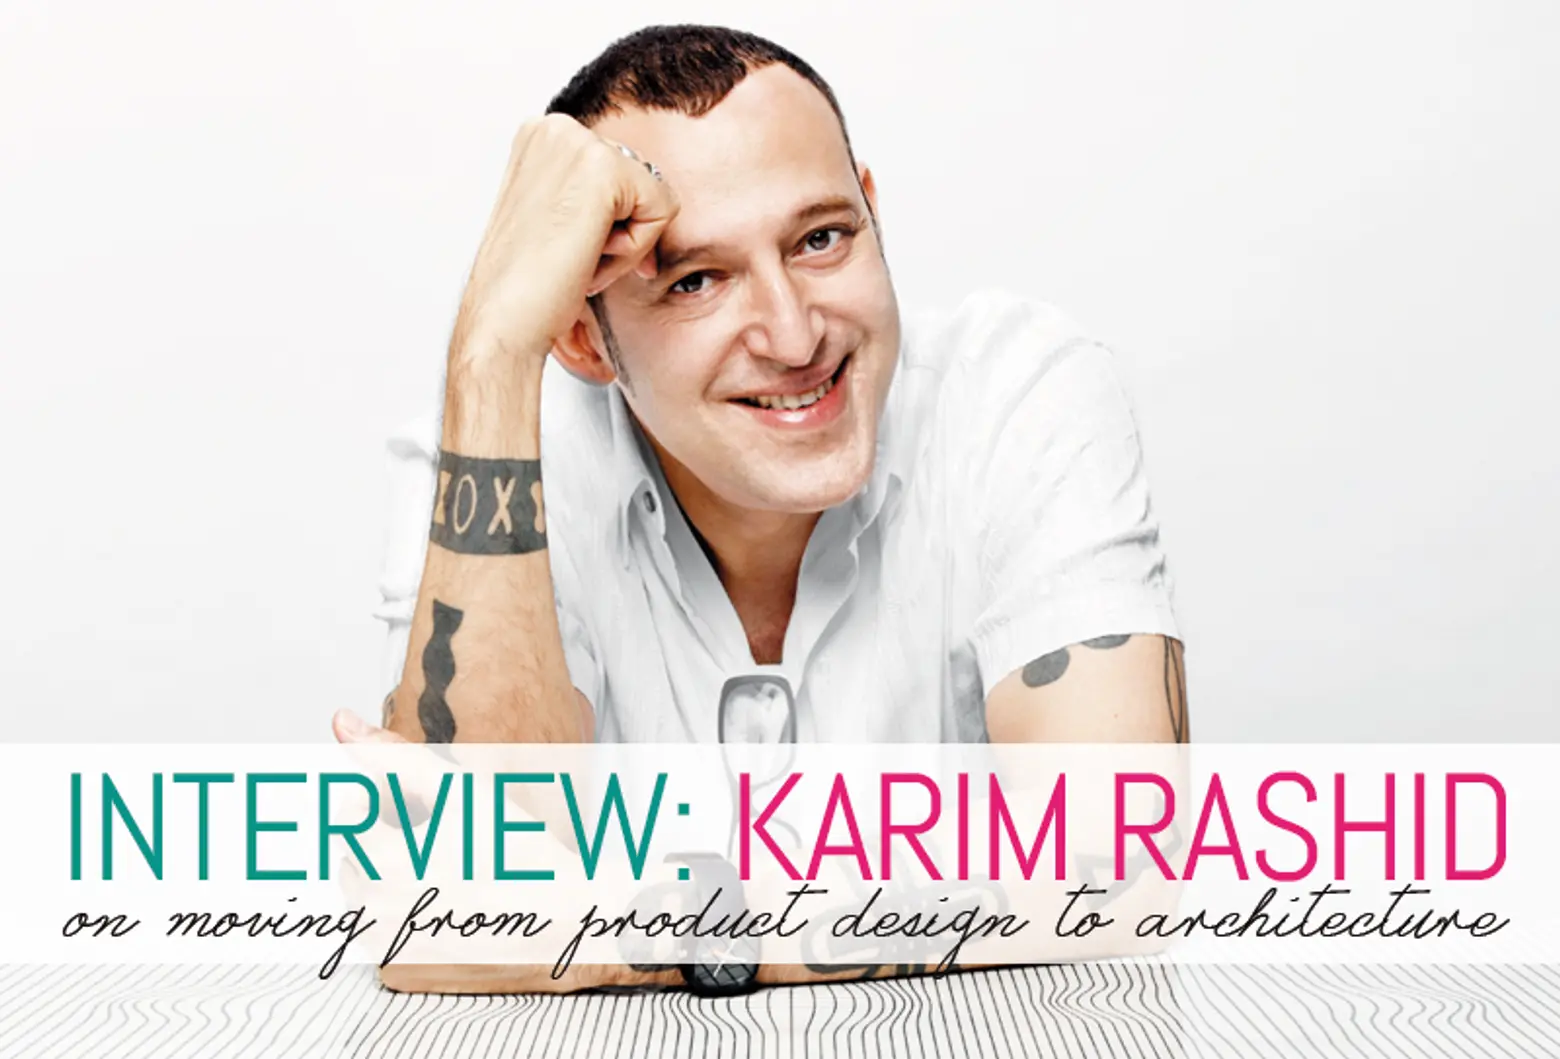 <b>INTERVIEW: Karim Rashid on His Move into Architecture and Designing Colorful NYC Condos</b>